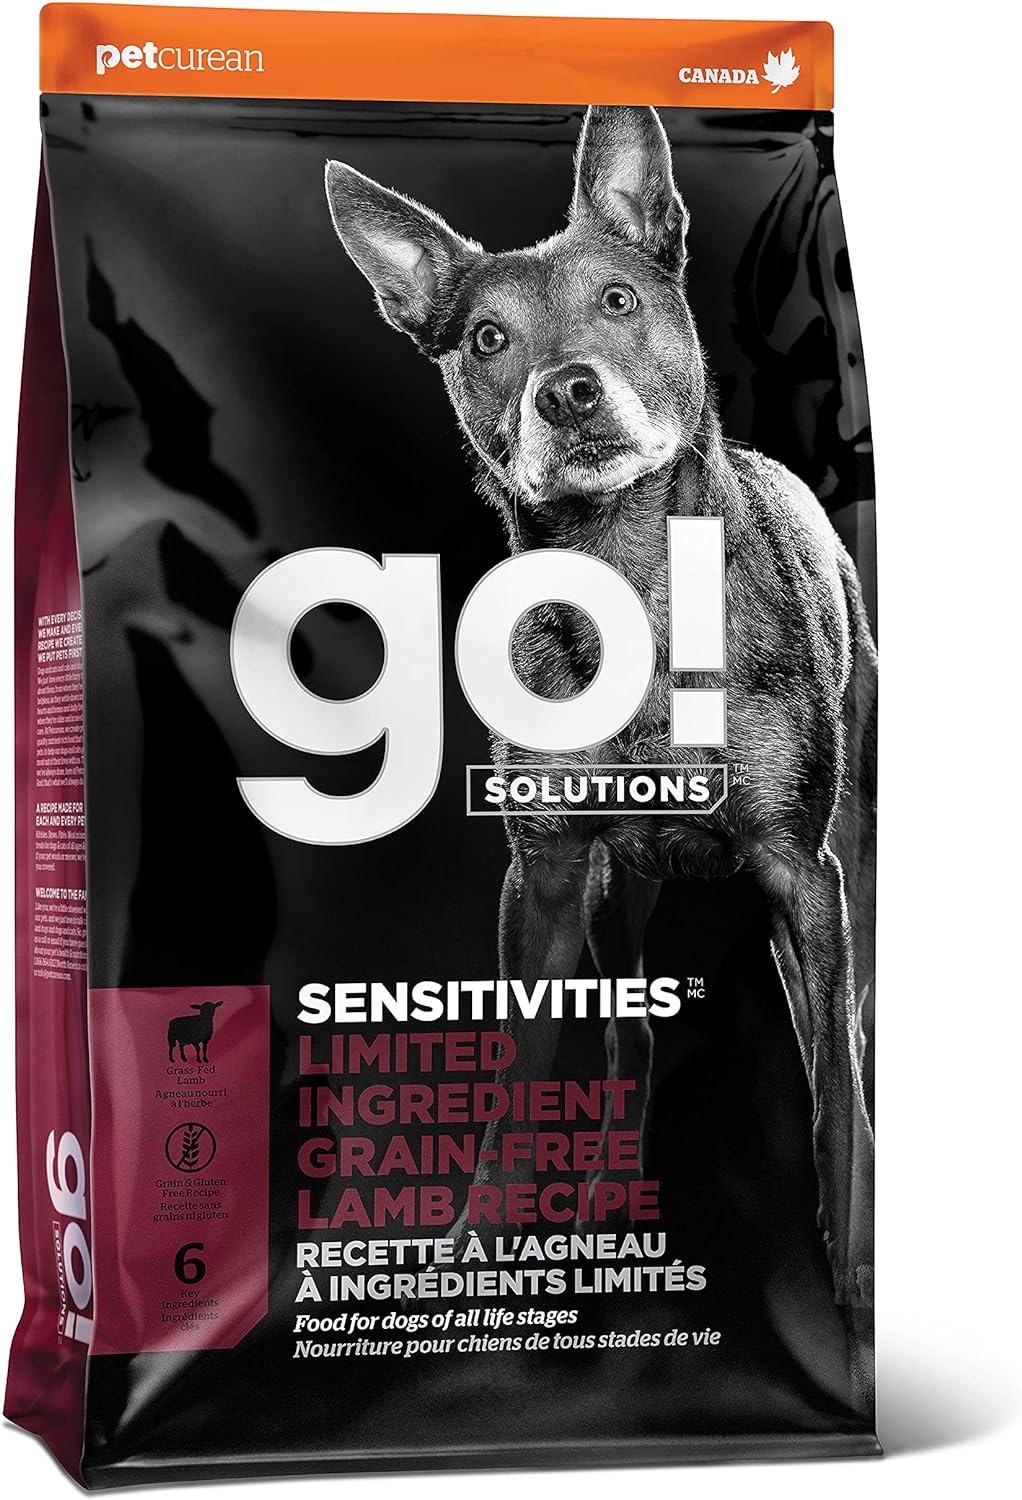 Go! Solutions Sensitivities Limited Ingredient Grain-Free Lamb Recipe Dry Dog Food – Gallery Image 1